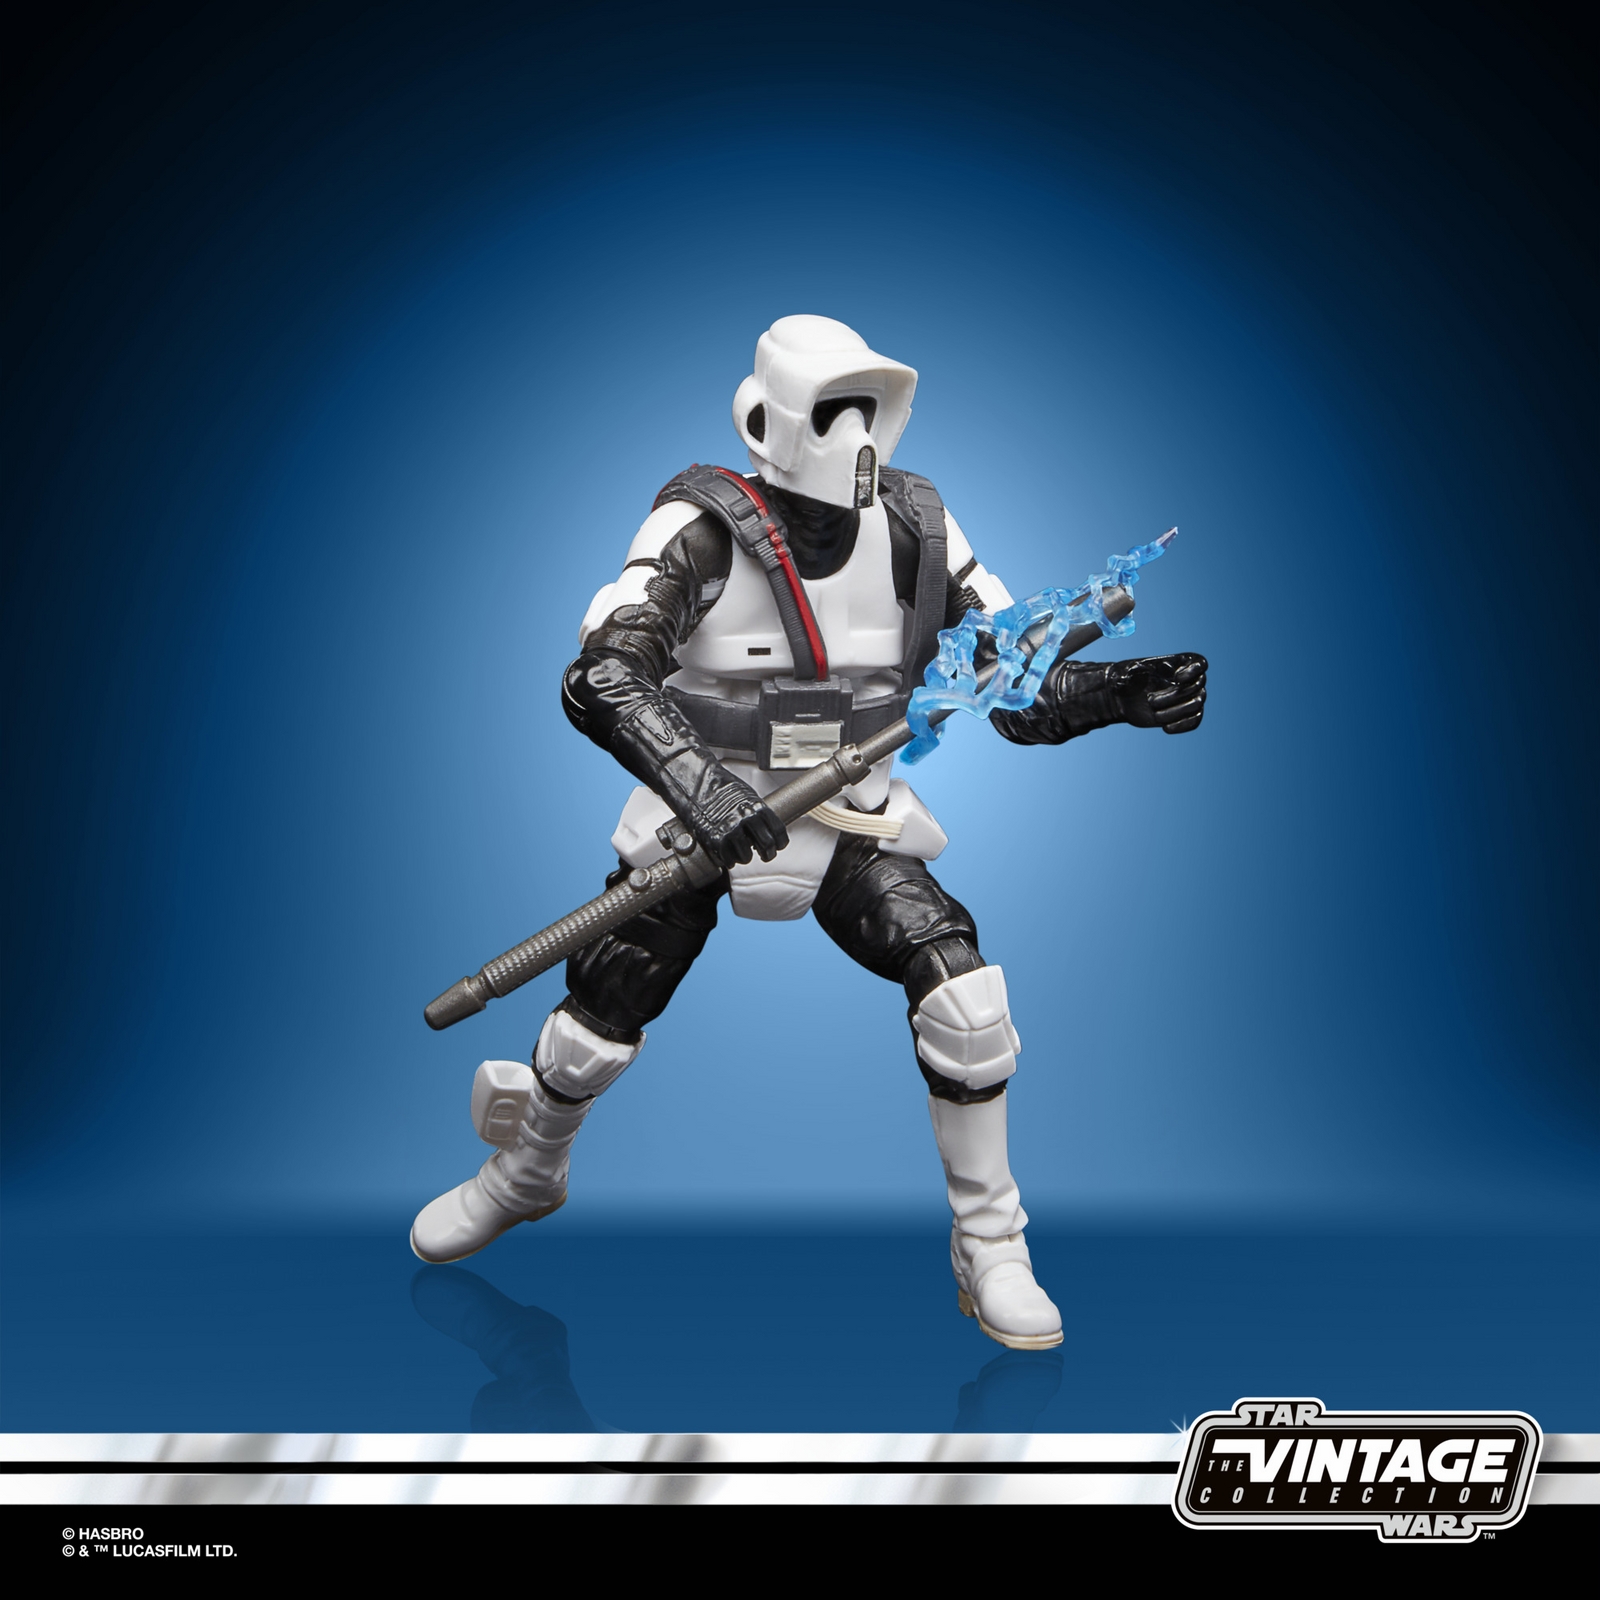 STAR WARS THE VINTAGE COLLECTION GAMING GREATS 3.75-INCH SHOCK SCOUT TROOPER Figure (3).jpg